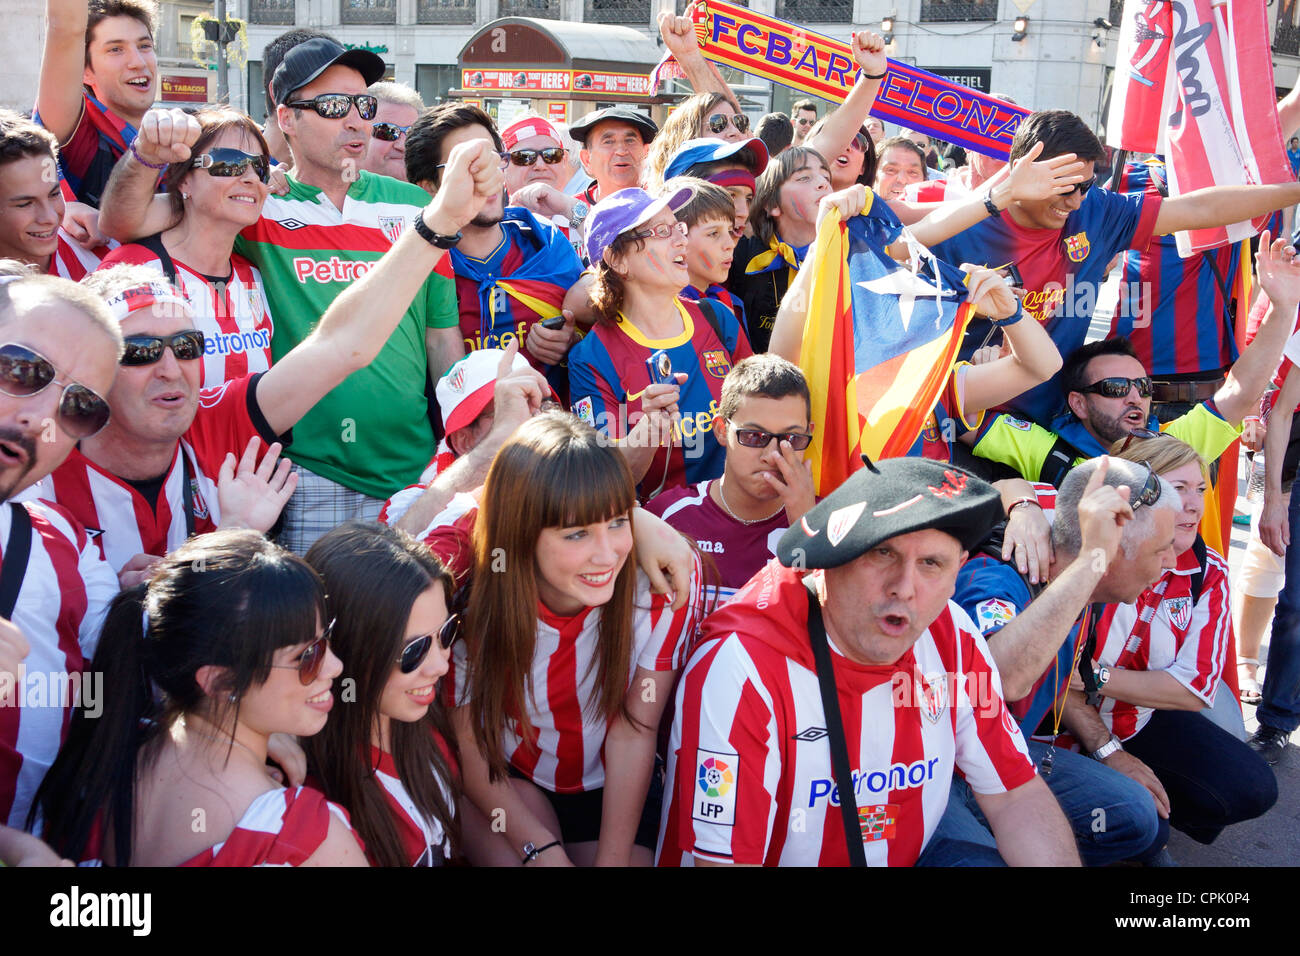 The final of the Copa del Rey has Madrid buzzing with Athletic Bilbao and FC Barcelona supporters. Stock Photo